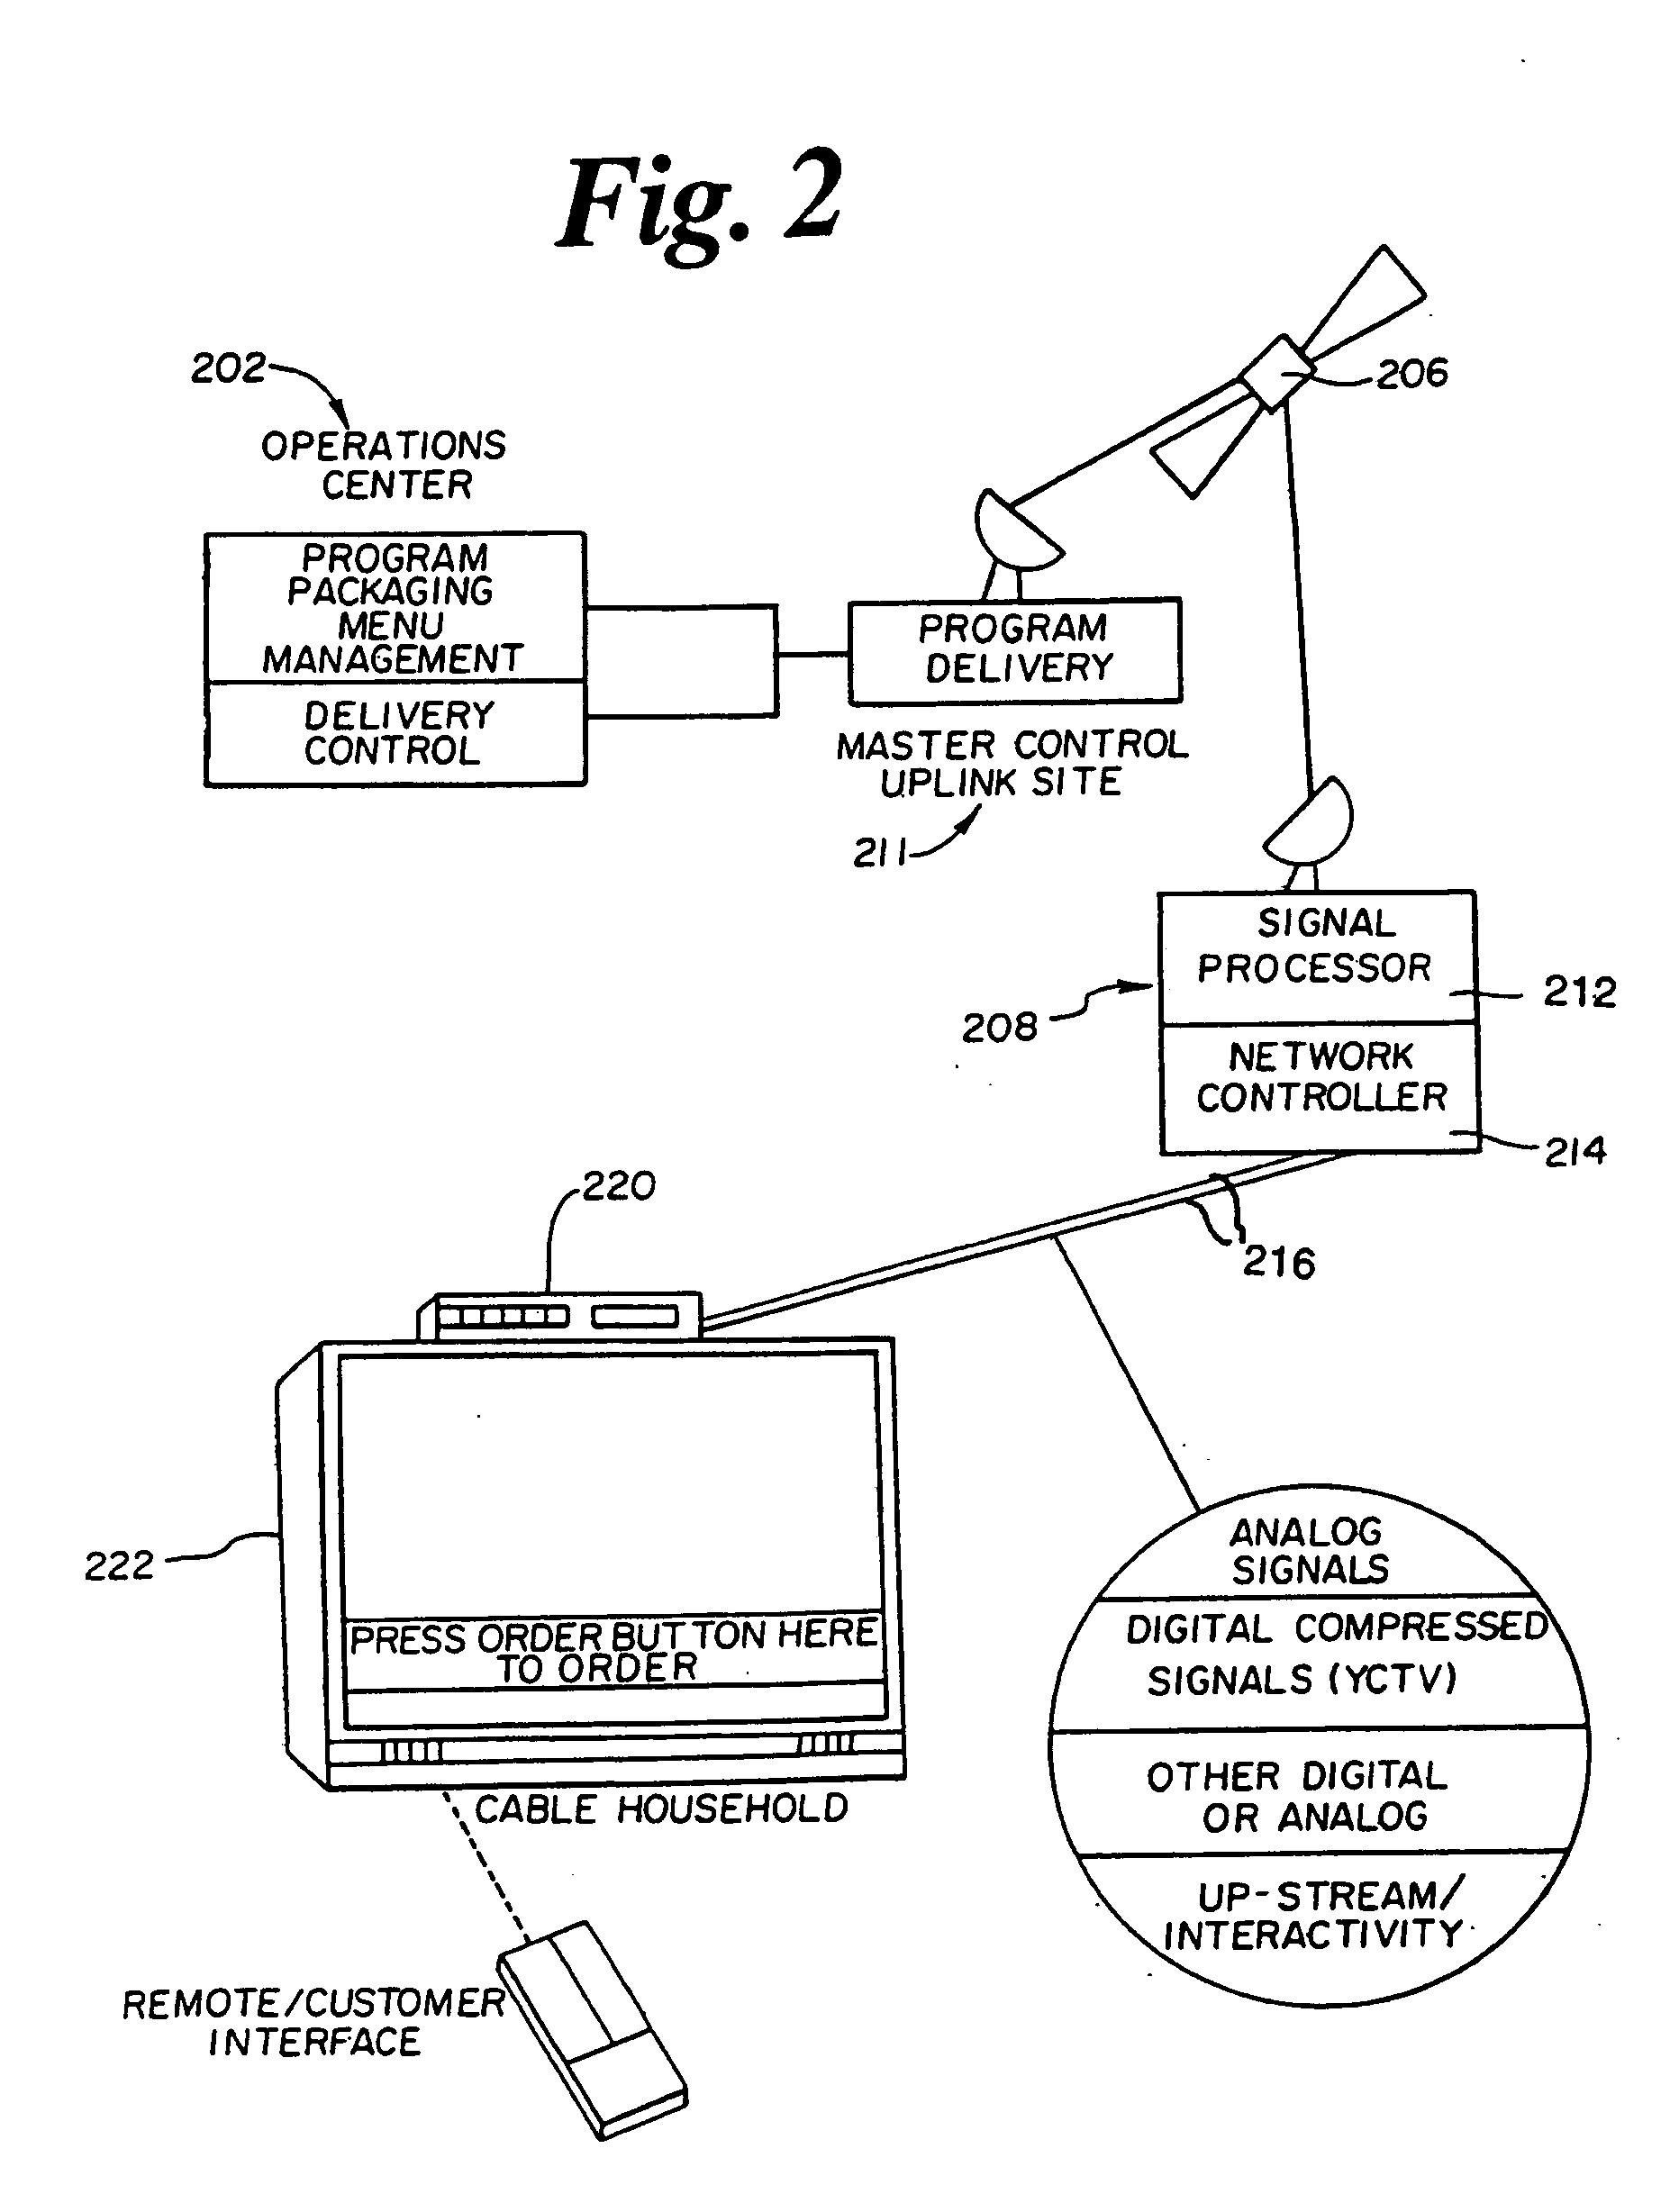 Remote control for menu driven subscriber access to television programming